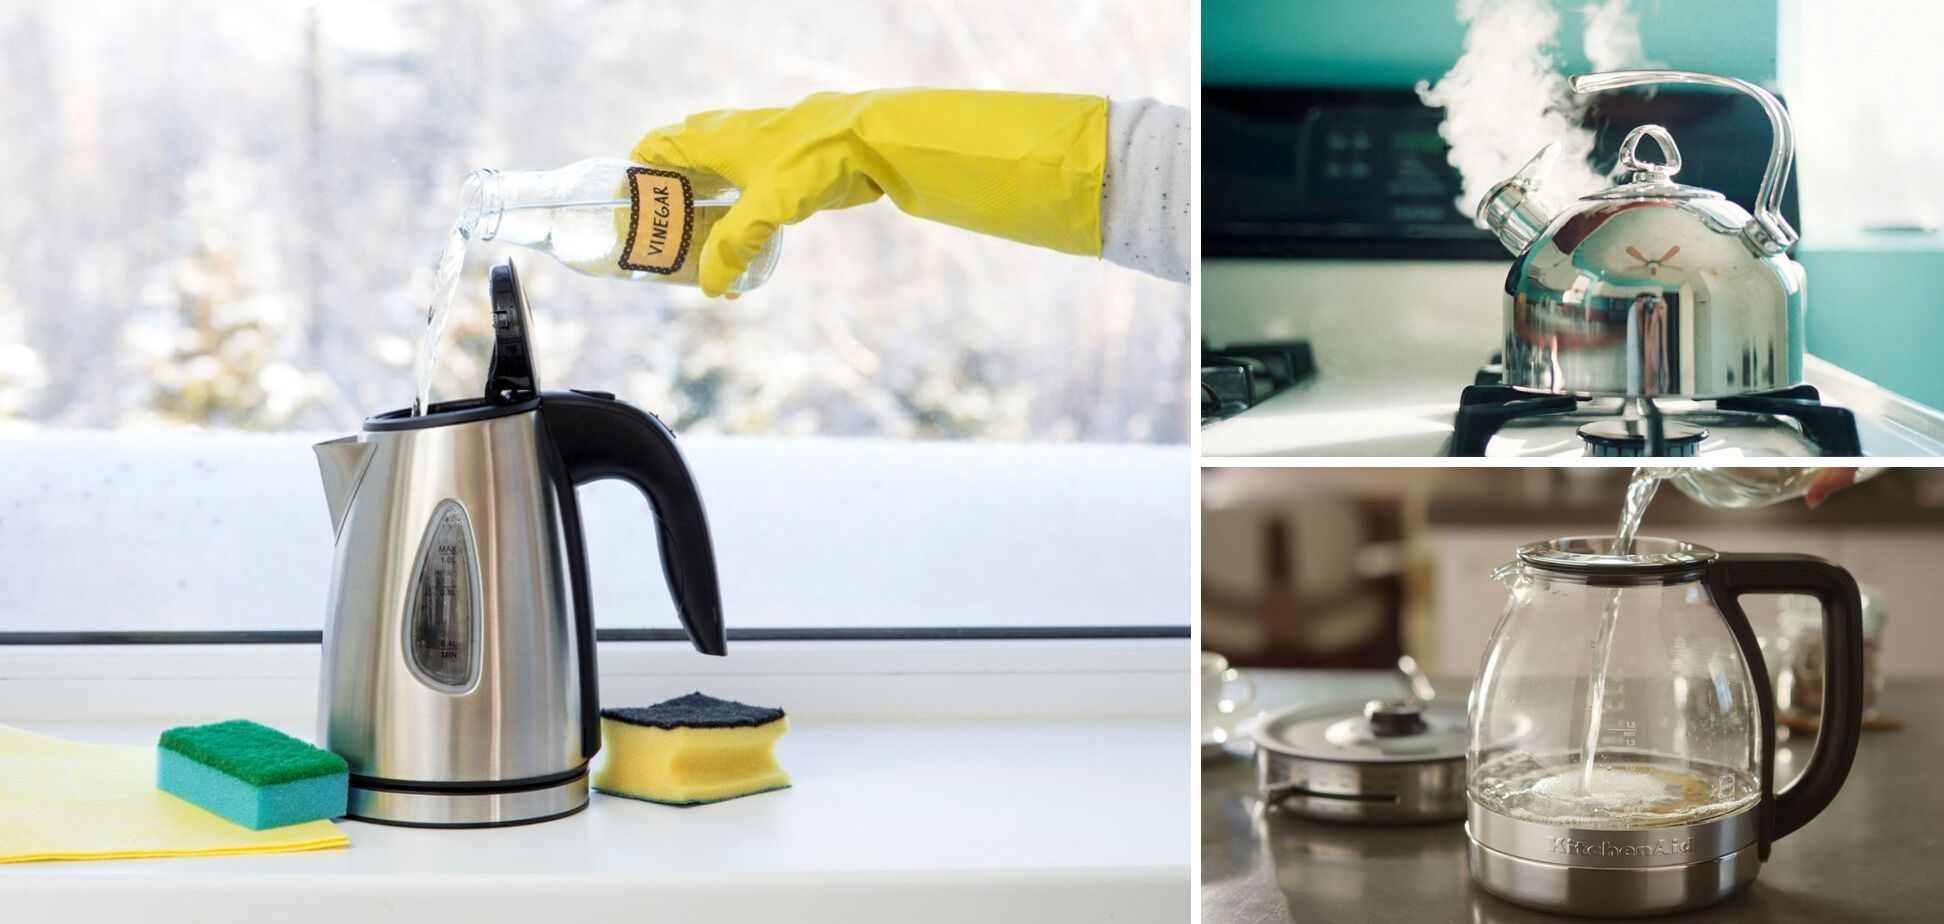 How to clean a kettle with vinegar